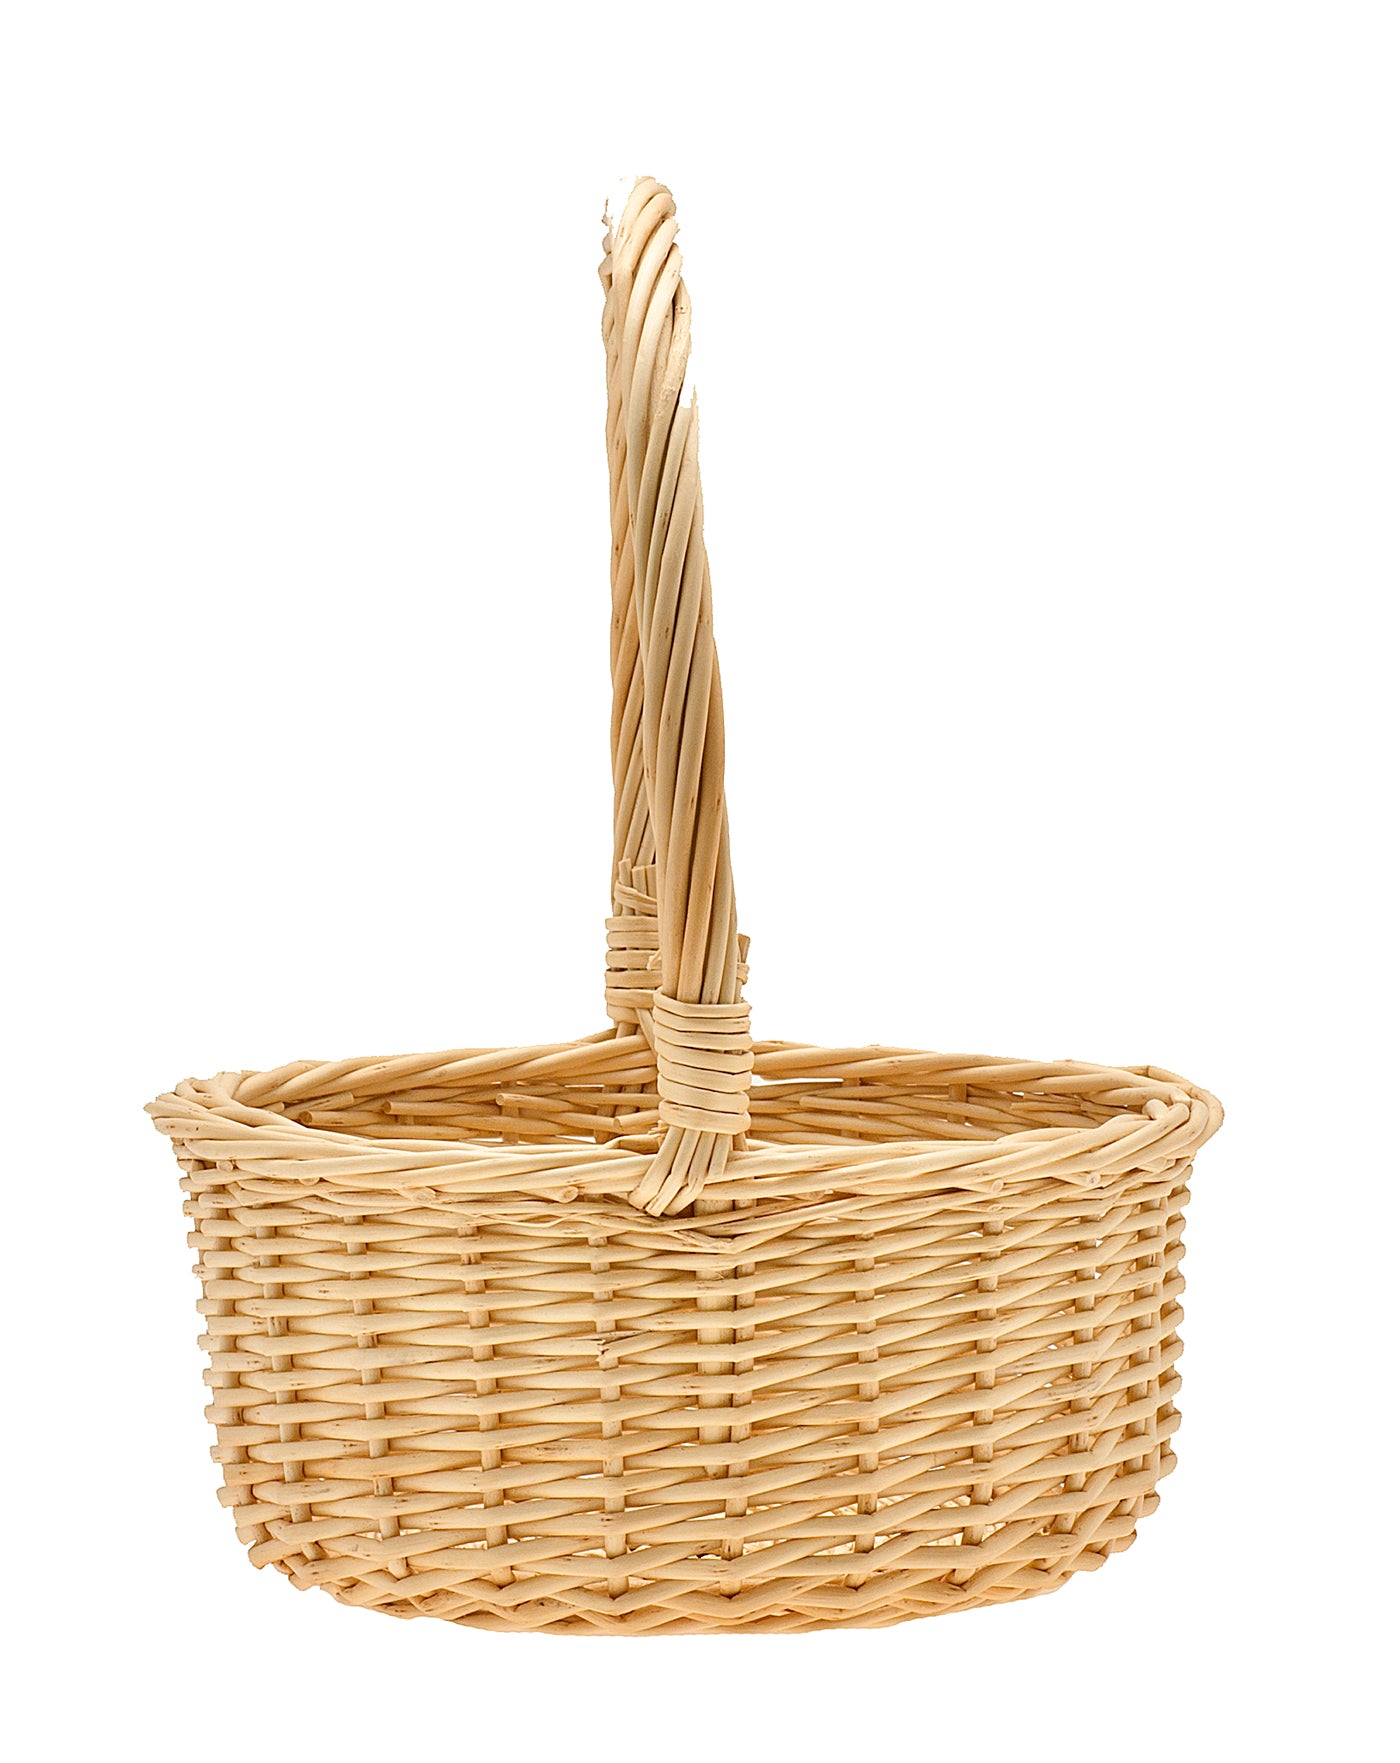 Round Willow Baskets - With Handle - LG - 12 x 5 inches